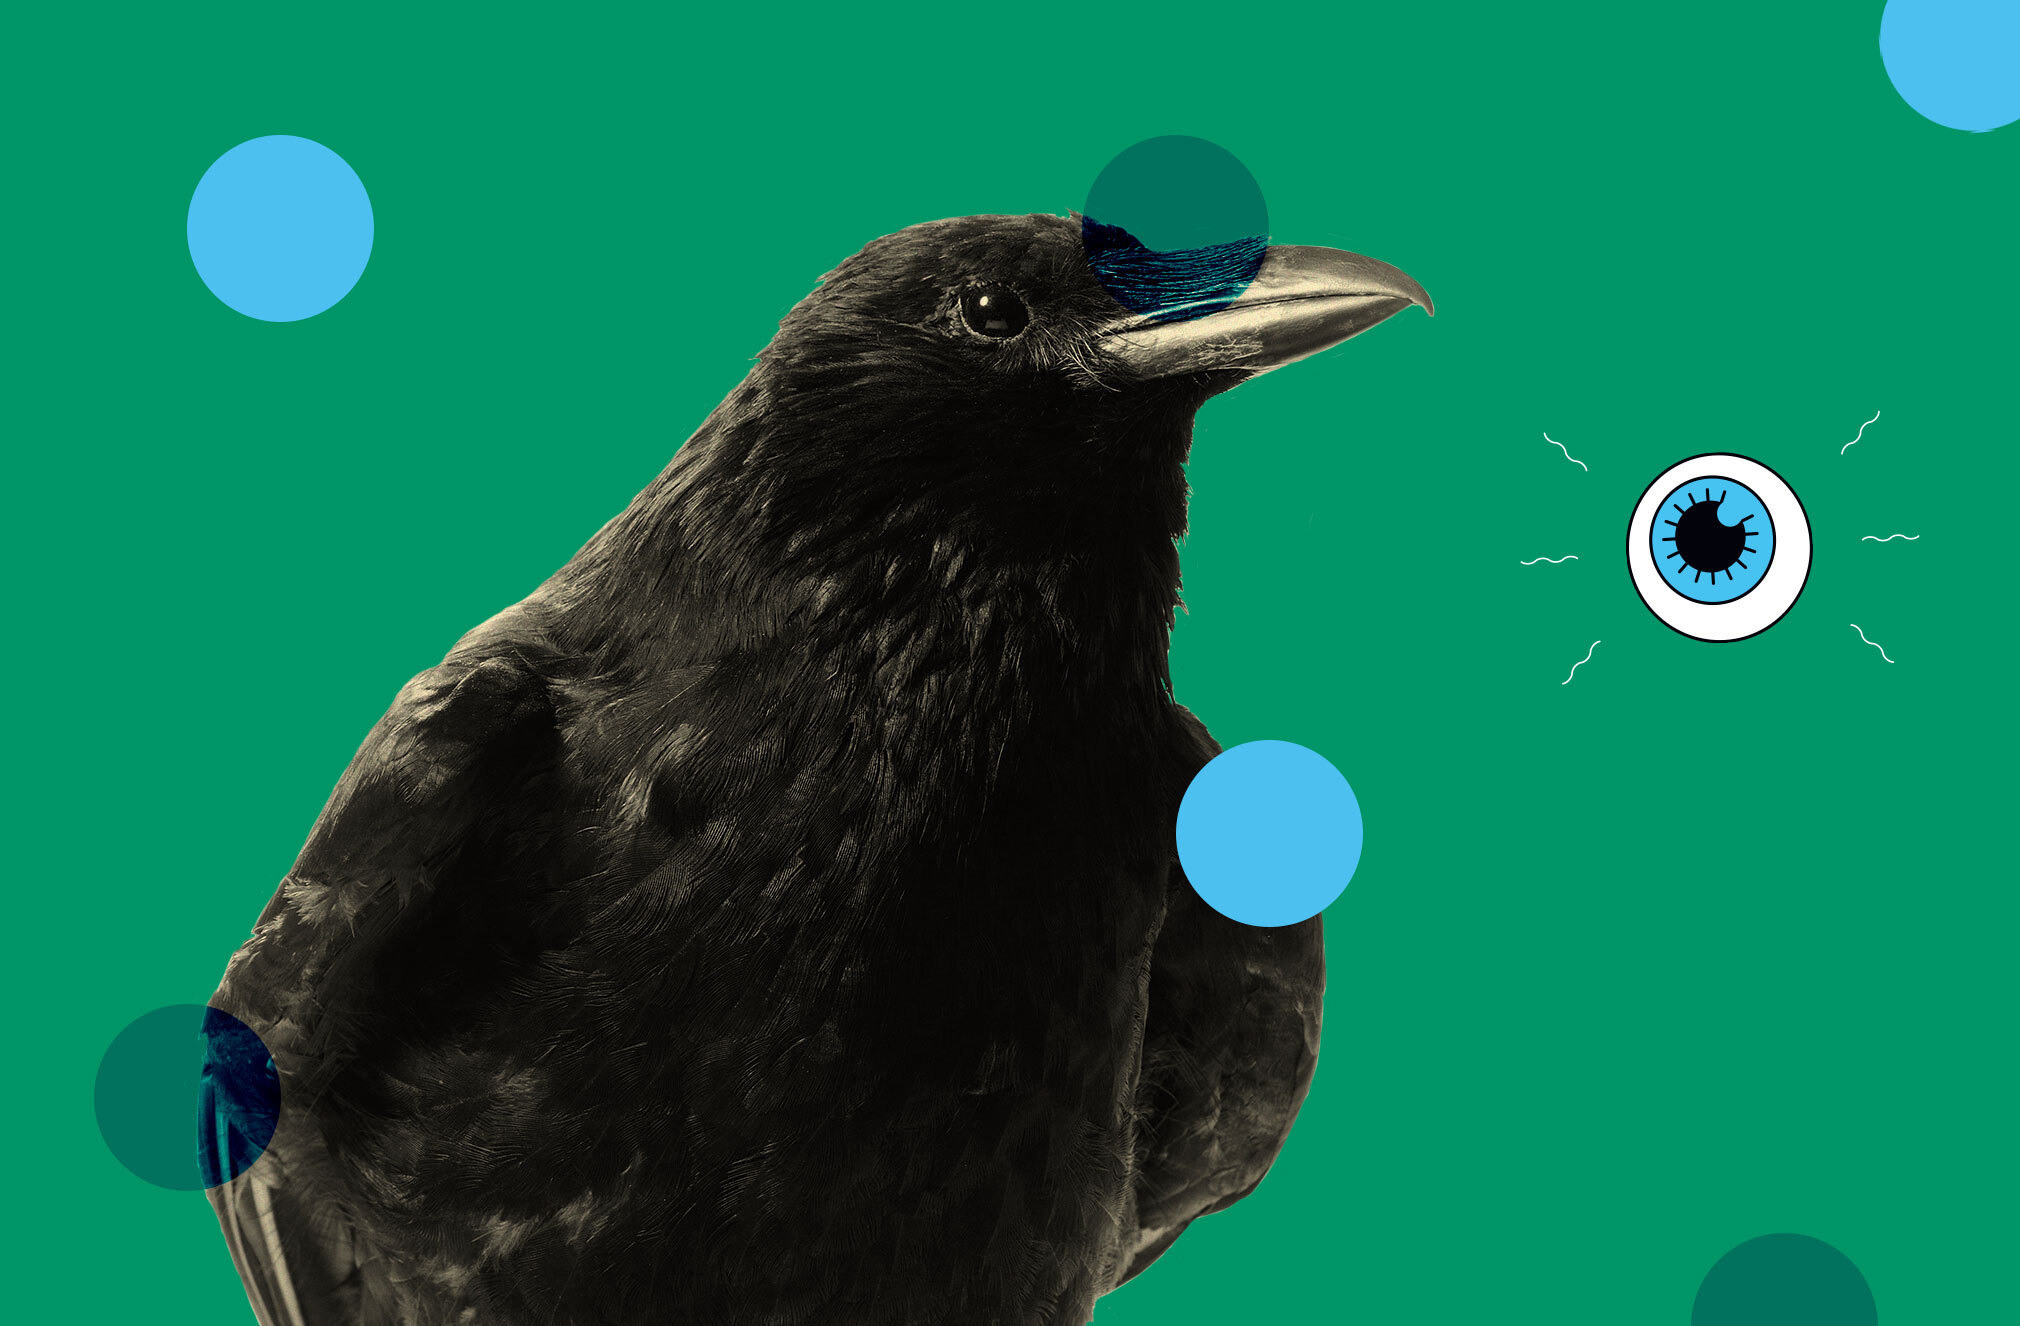 Even more proof that crows are terrifyingly smart